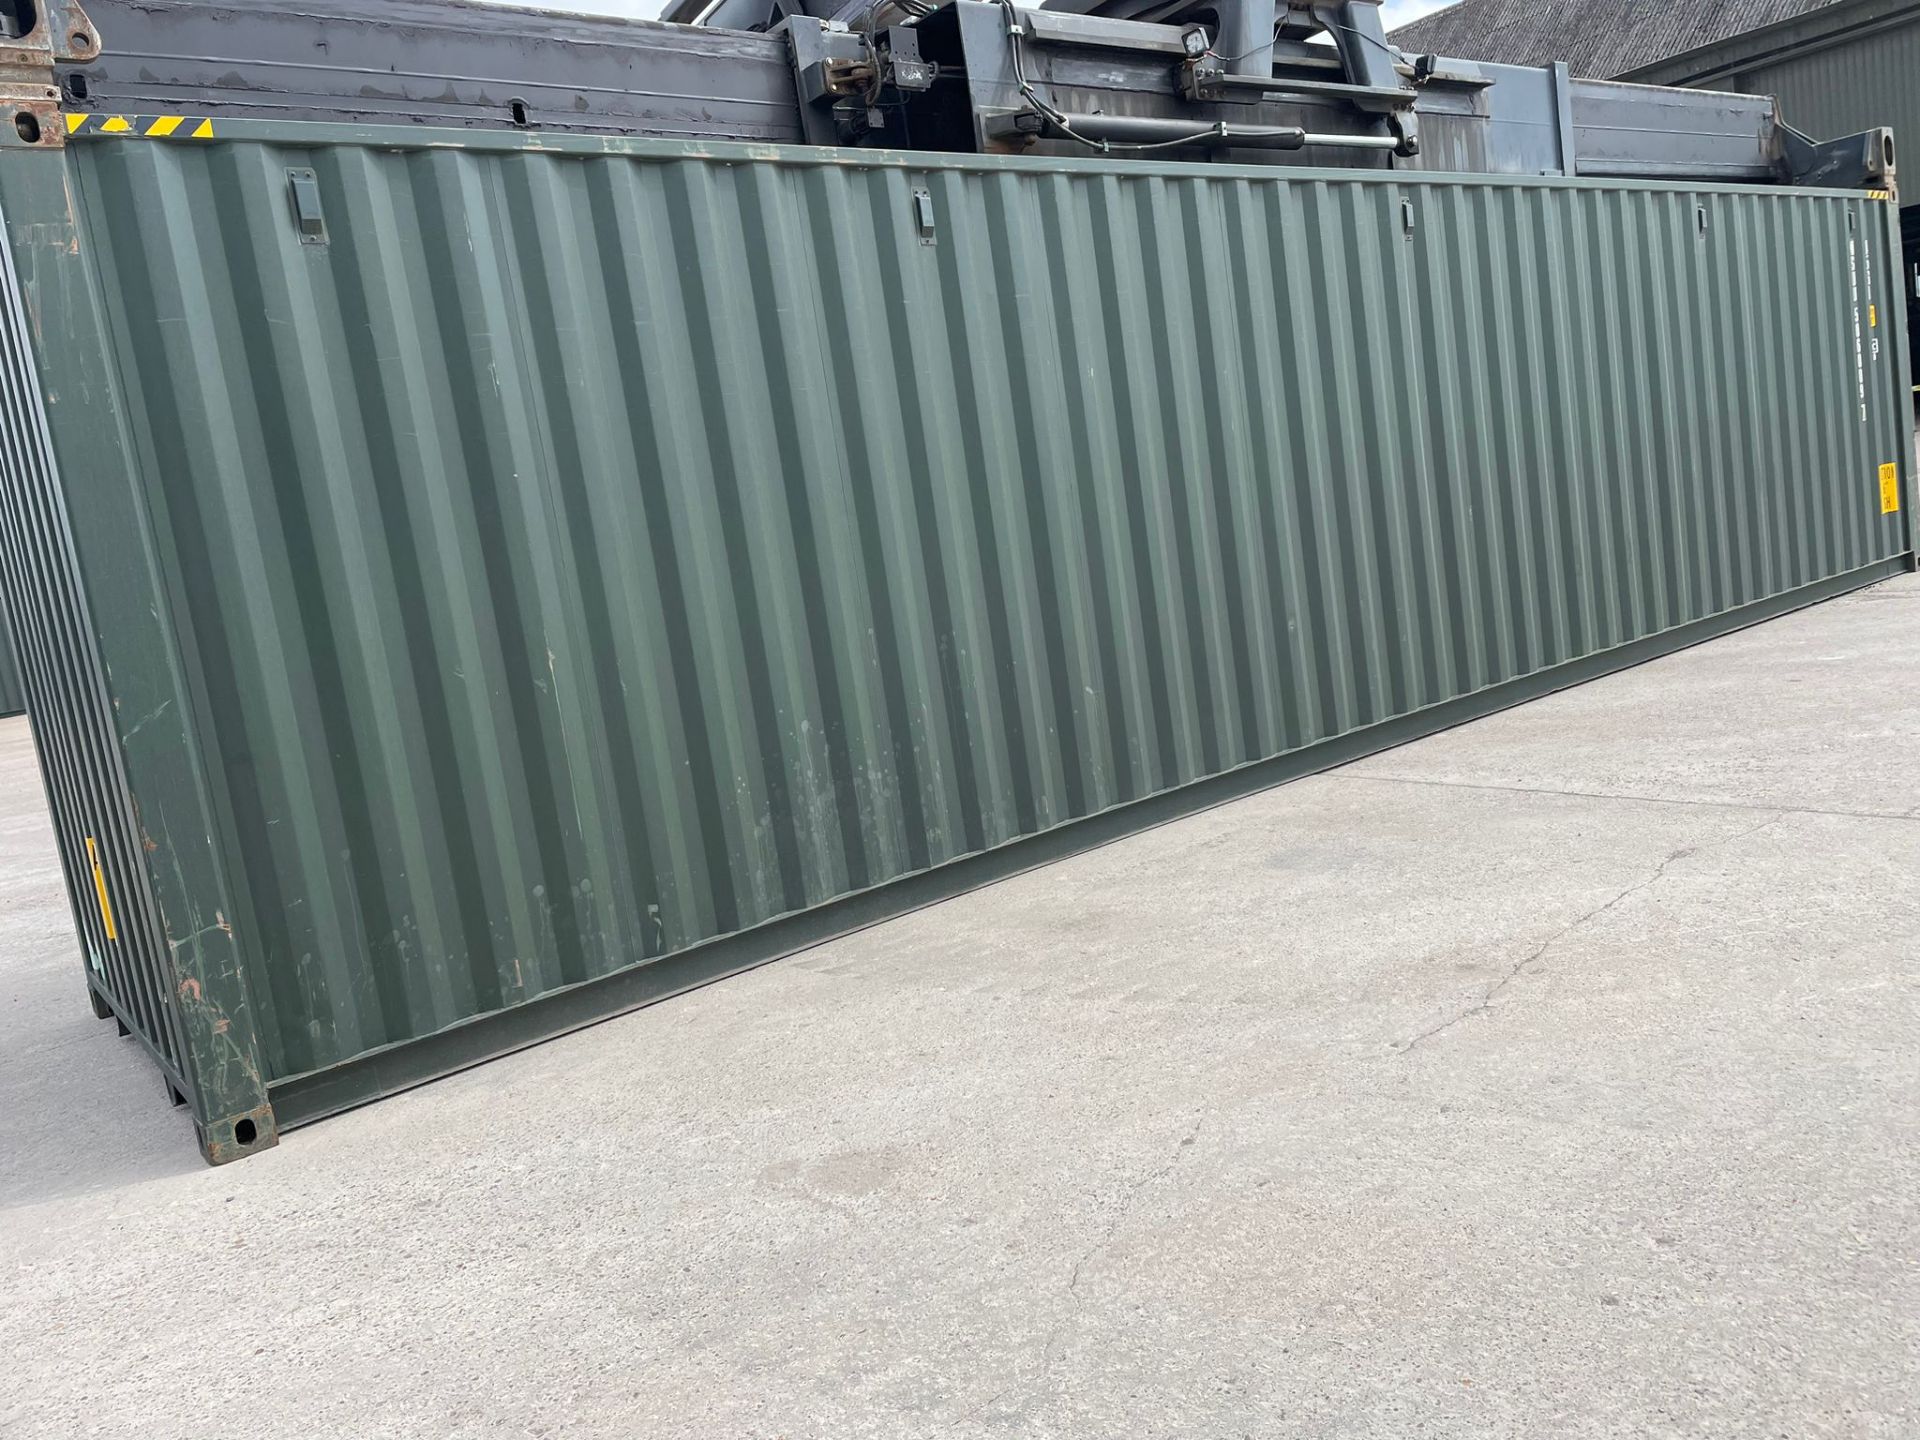 40ft HC Shipping Container - ref MSUU5060097 - NO RESERVE